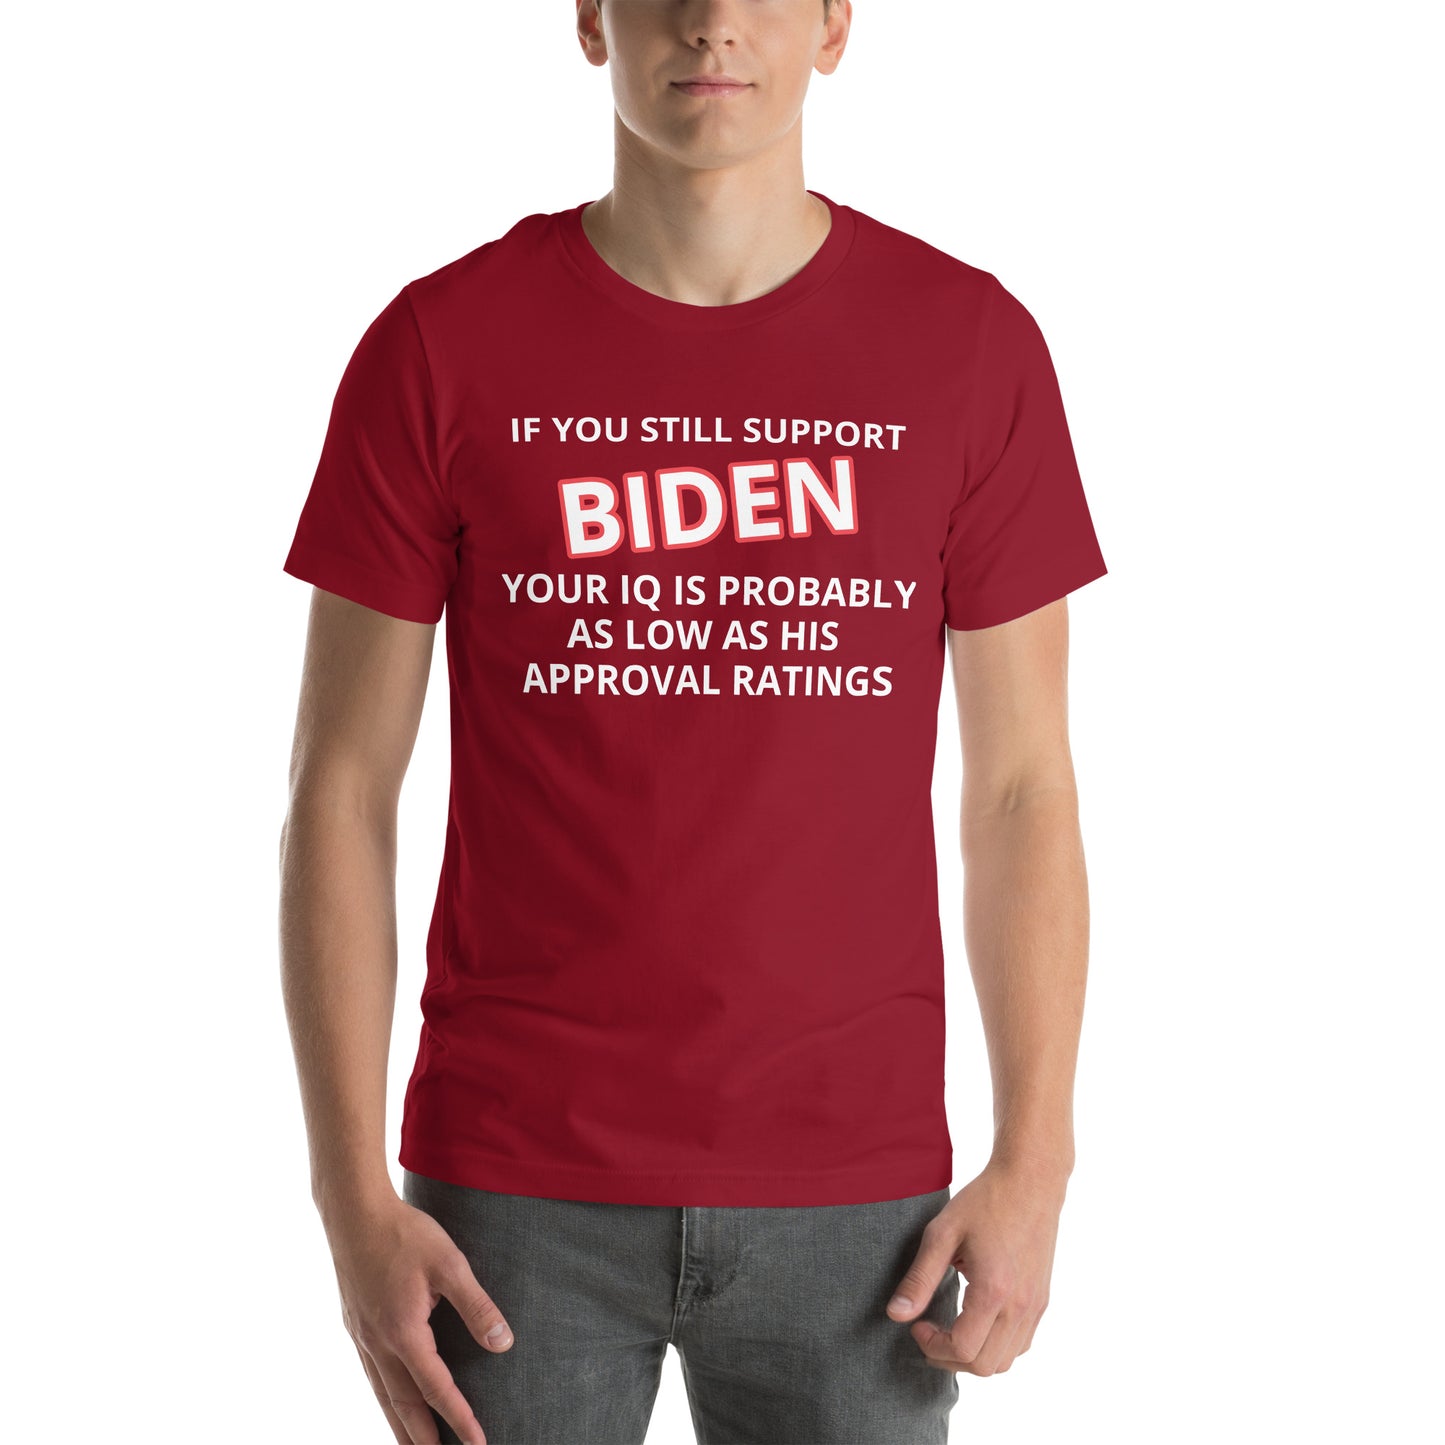 If you support Biden Funny T-shirt Choose color and Size